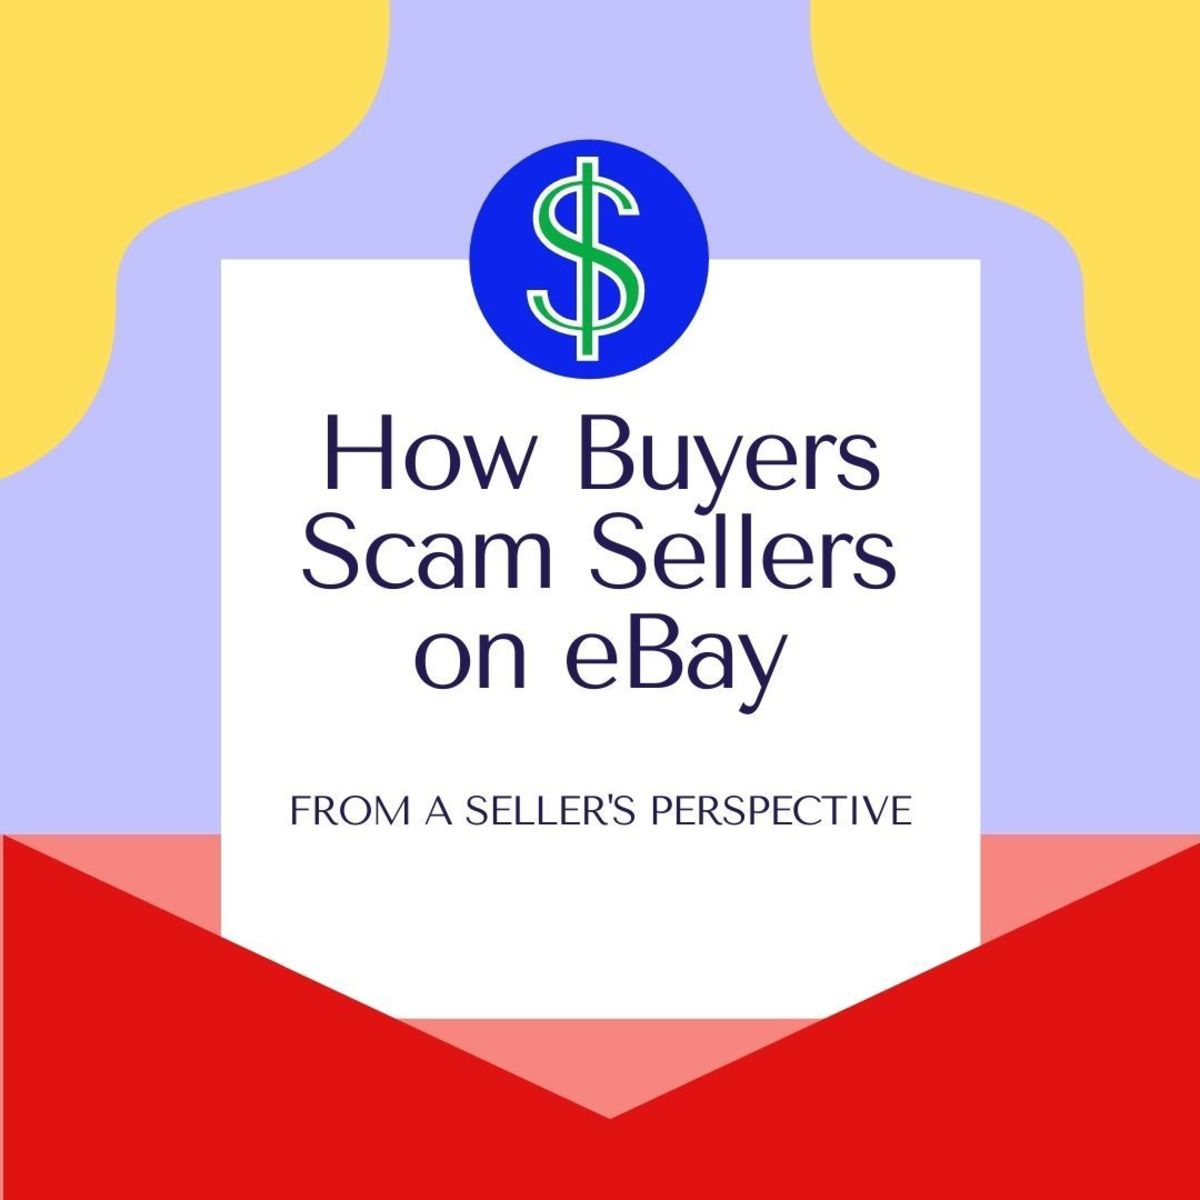 How Buyers Scam Sellers on eBay (A Decade of Scams) - TurboFuture